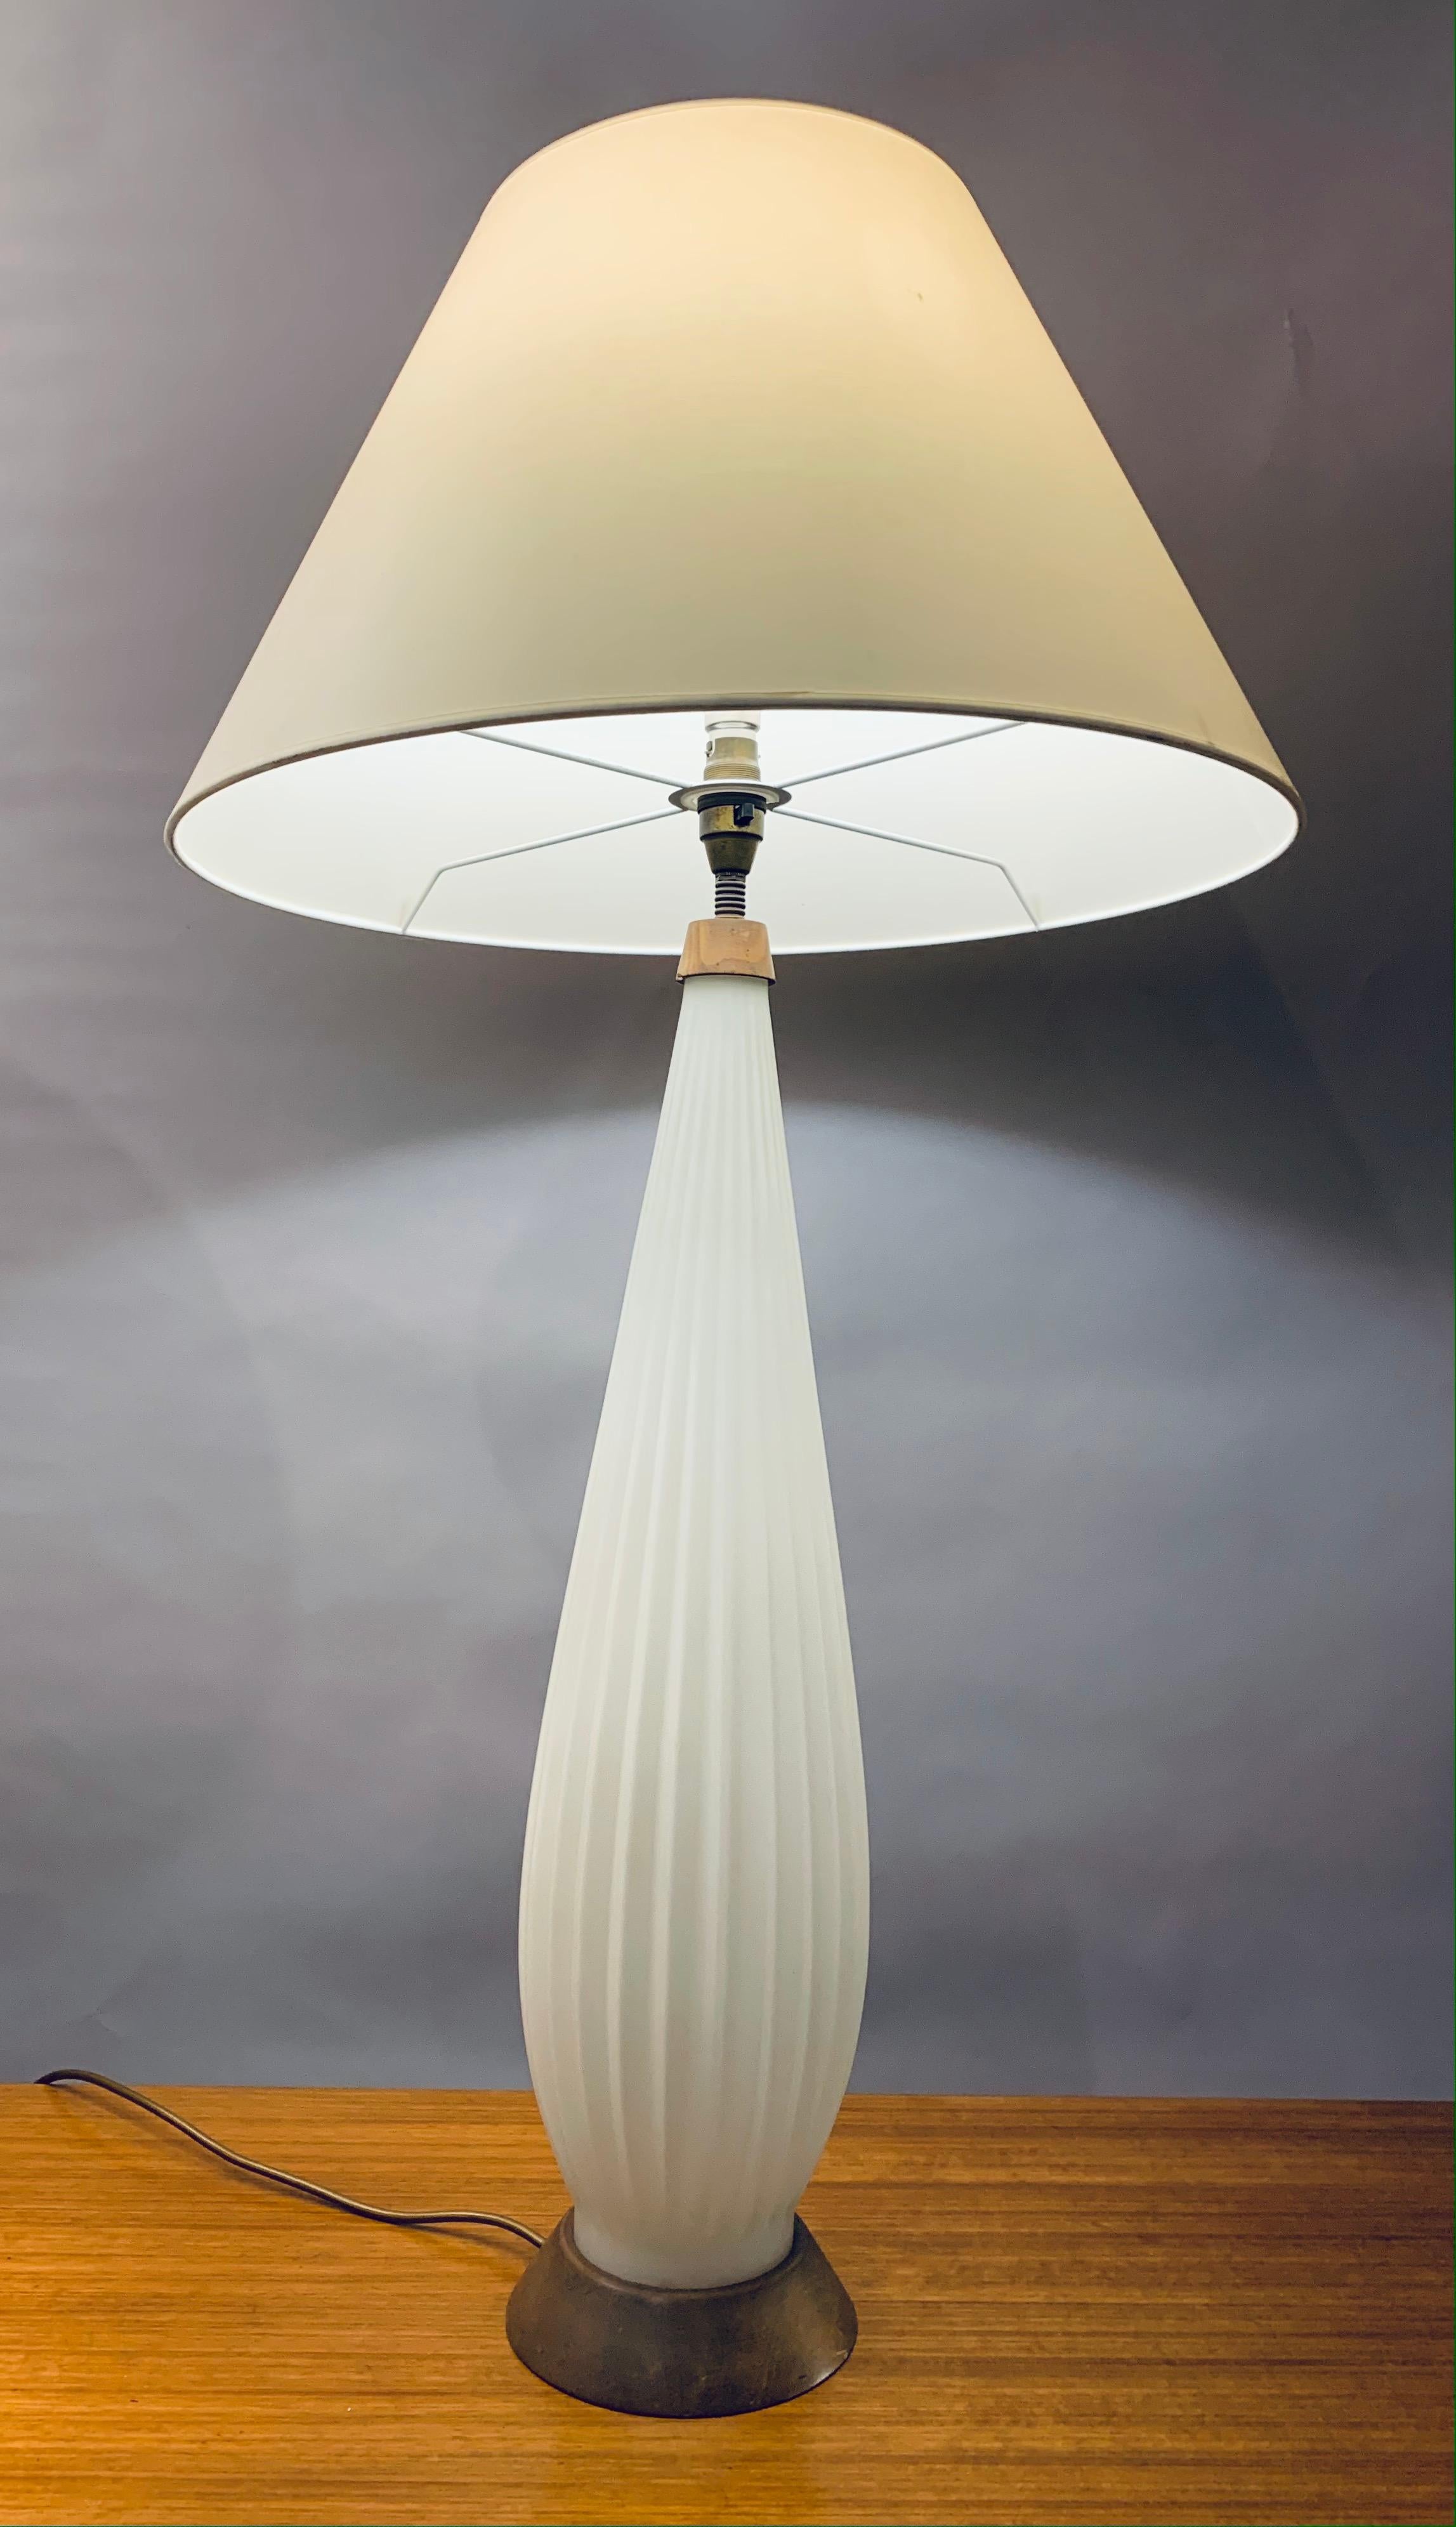 1950s, Italian, Alfredo Barbini style, tall, opaque-white, ribbed, Murano glass elegant table lamp. A beautiful and majestic lamp with a tapered wooden base which matches the top where the bayonet bulb light socket sits. A 